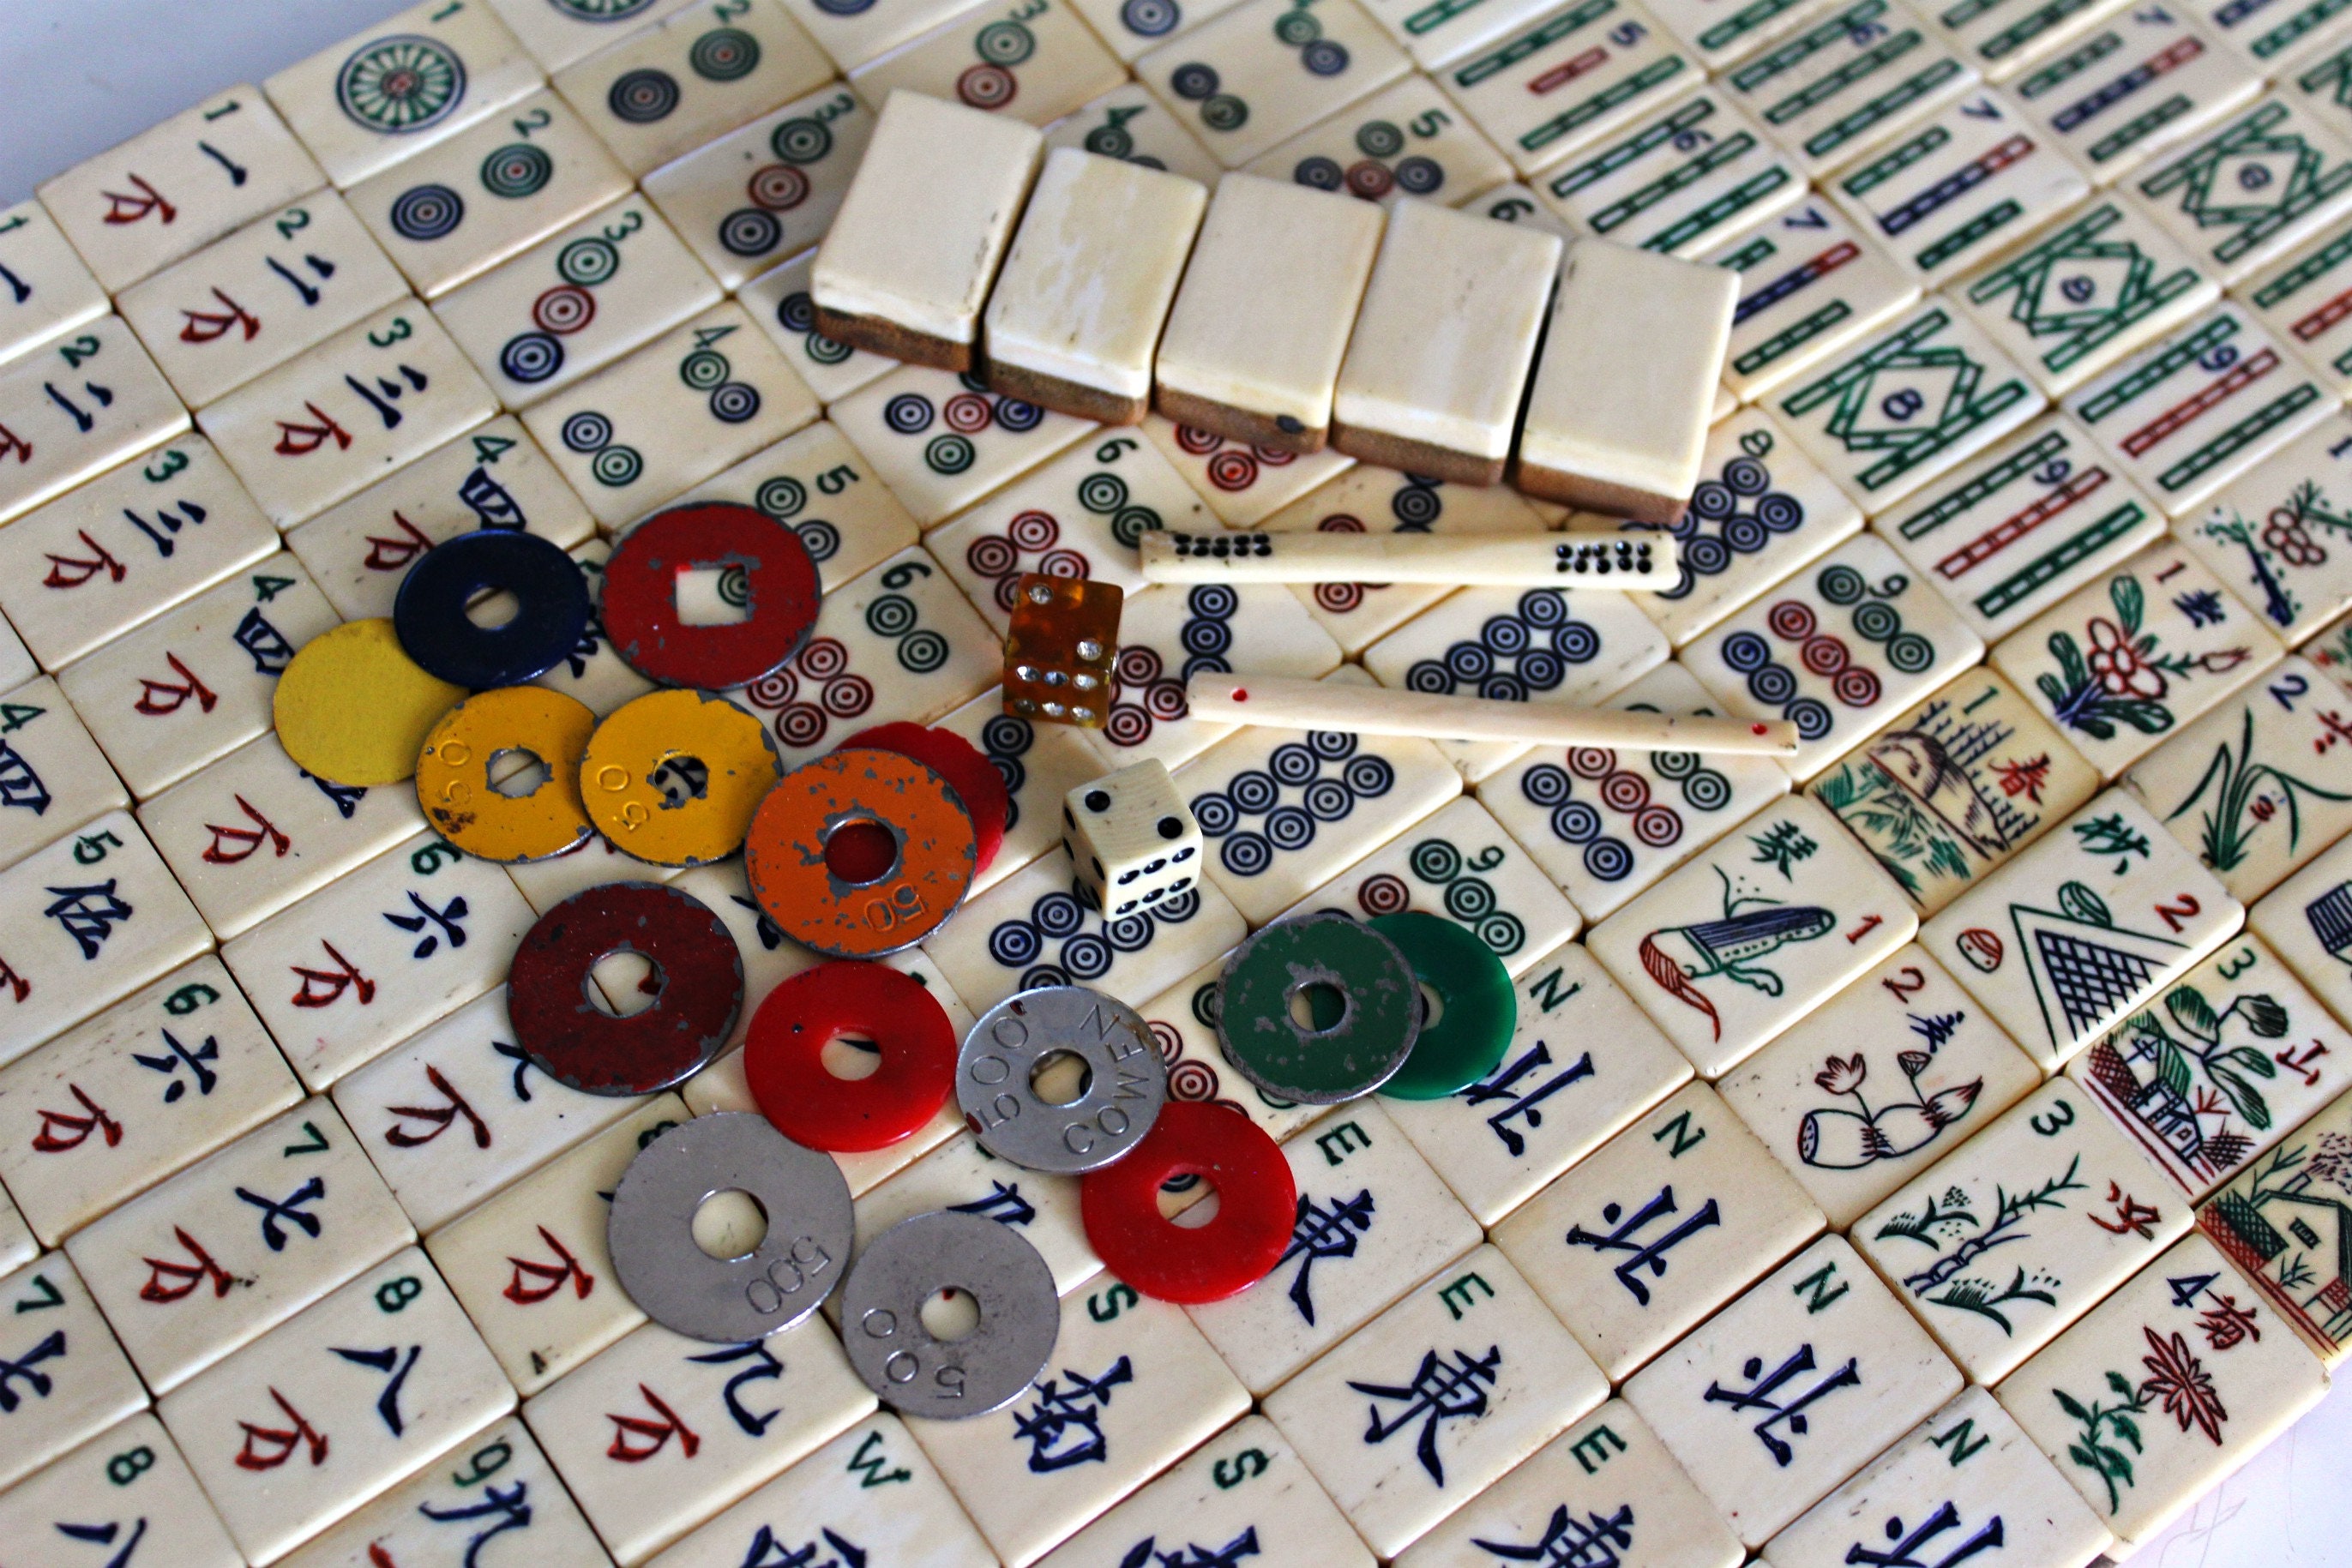 Traditional American Mahjong Set, The Water Margin - Bone & Bamboo Tiles,  Rosewood Case, & Accessories 